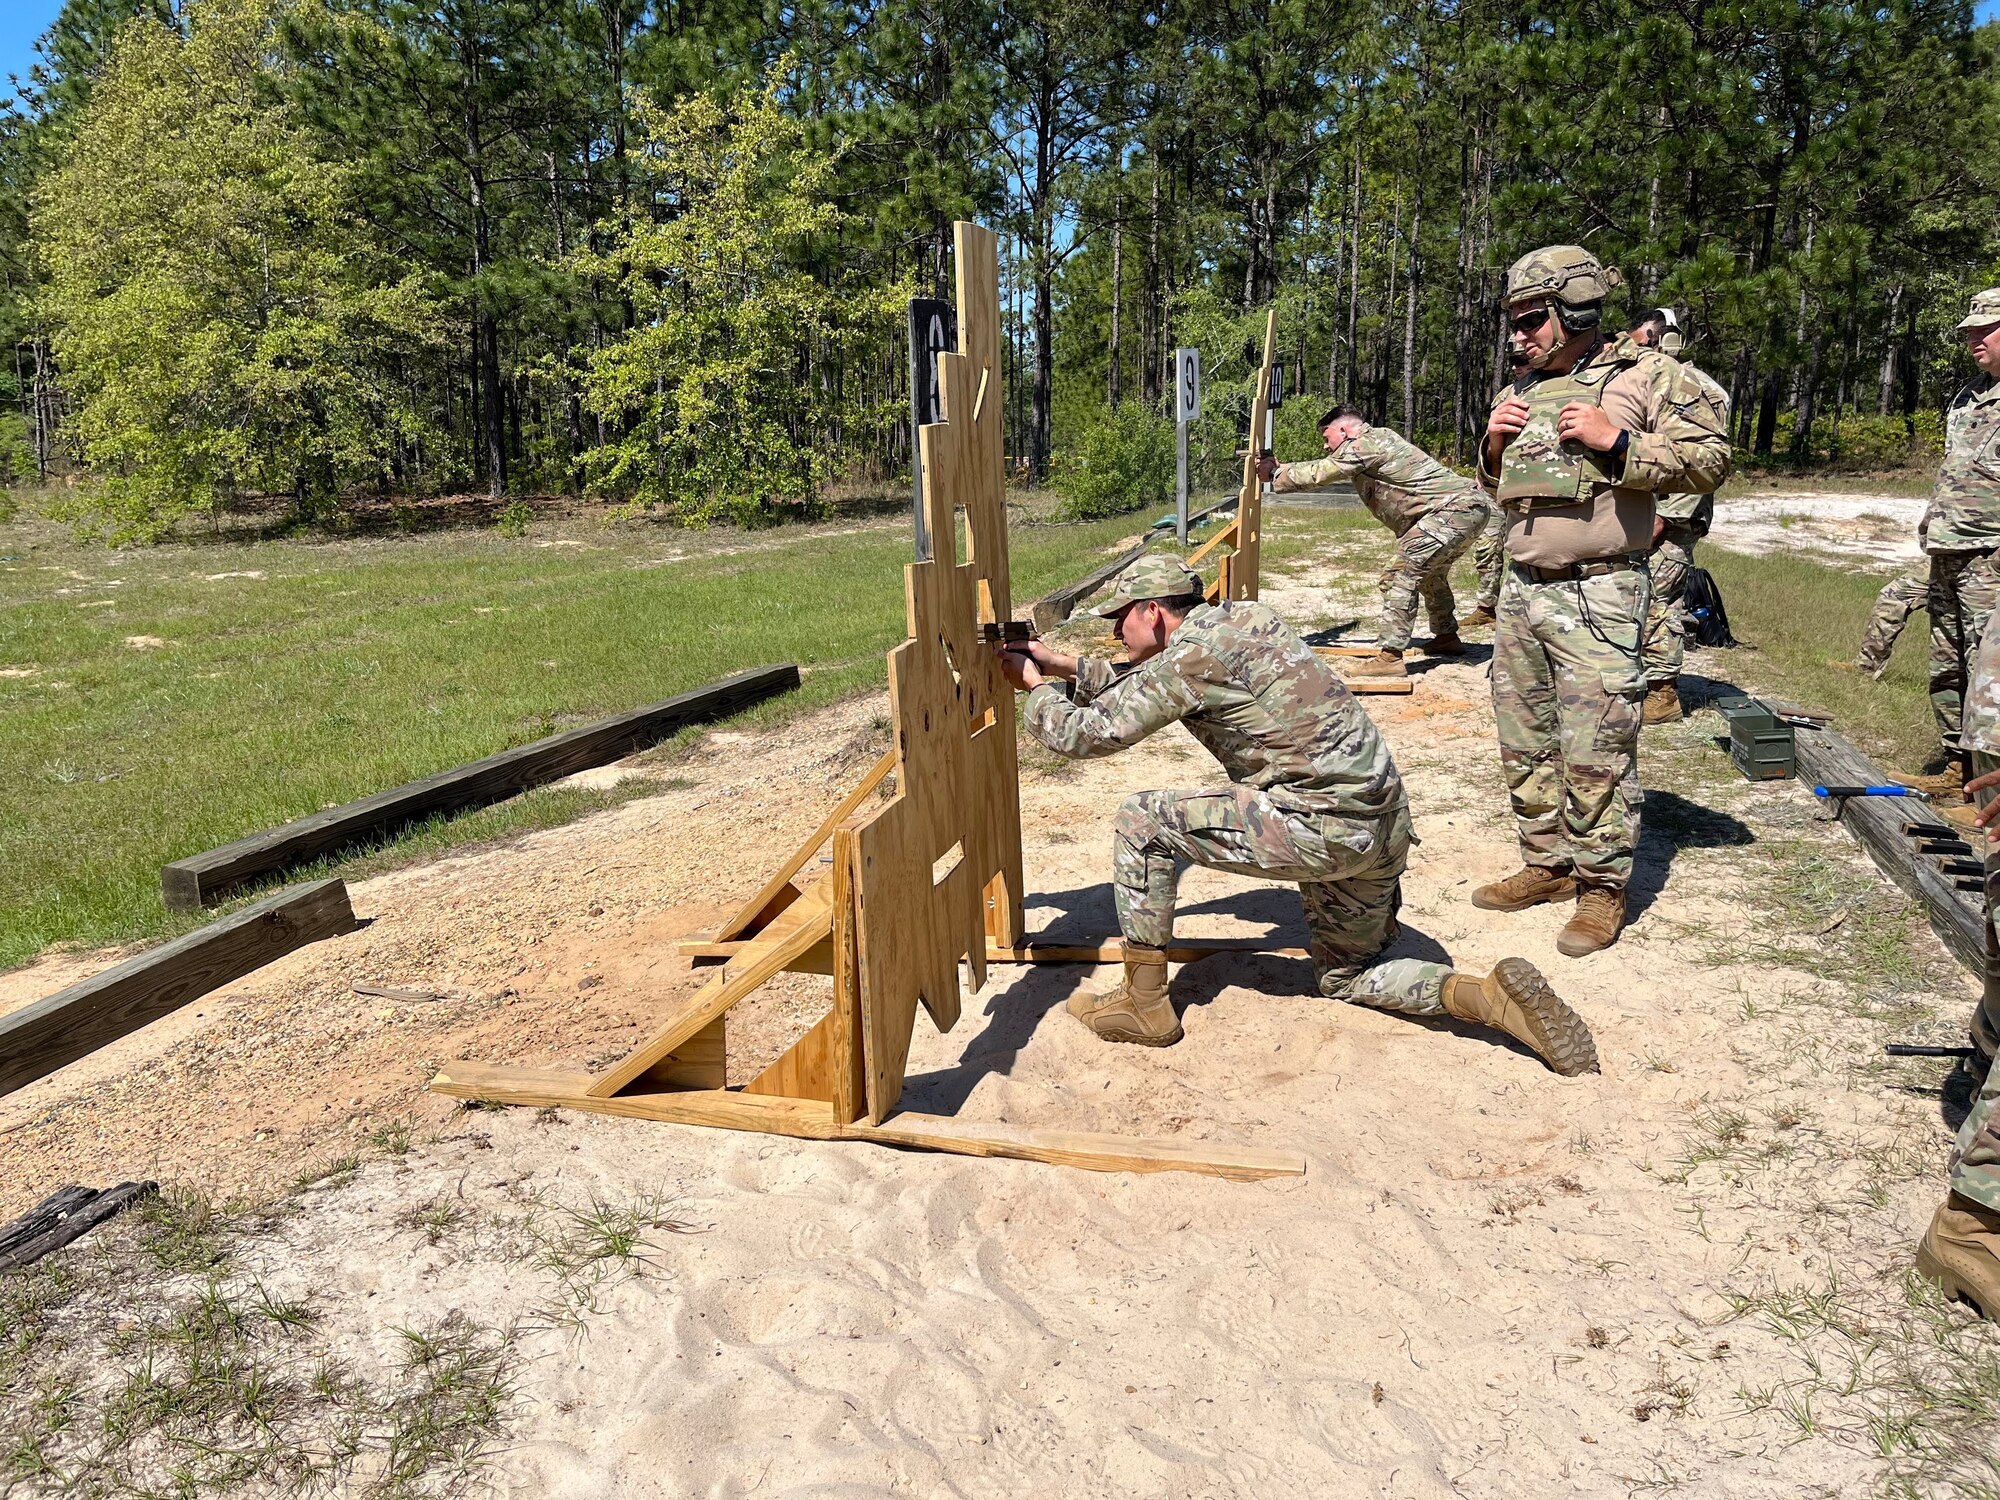 U.S. Air Force Capt. James Hejna, bottom middle, the 571st Mobility Support Advisory Squadron readiness flight commander, fires a SIG Sauer M-18 pistol while a U.S. Army Soldier with the 1st Security Force Assistance Brigade supervises the firing range at Fort Benning, Georgia, April 19, 2023.